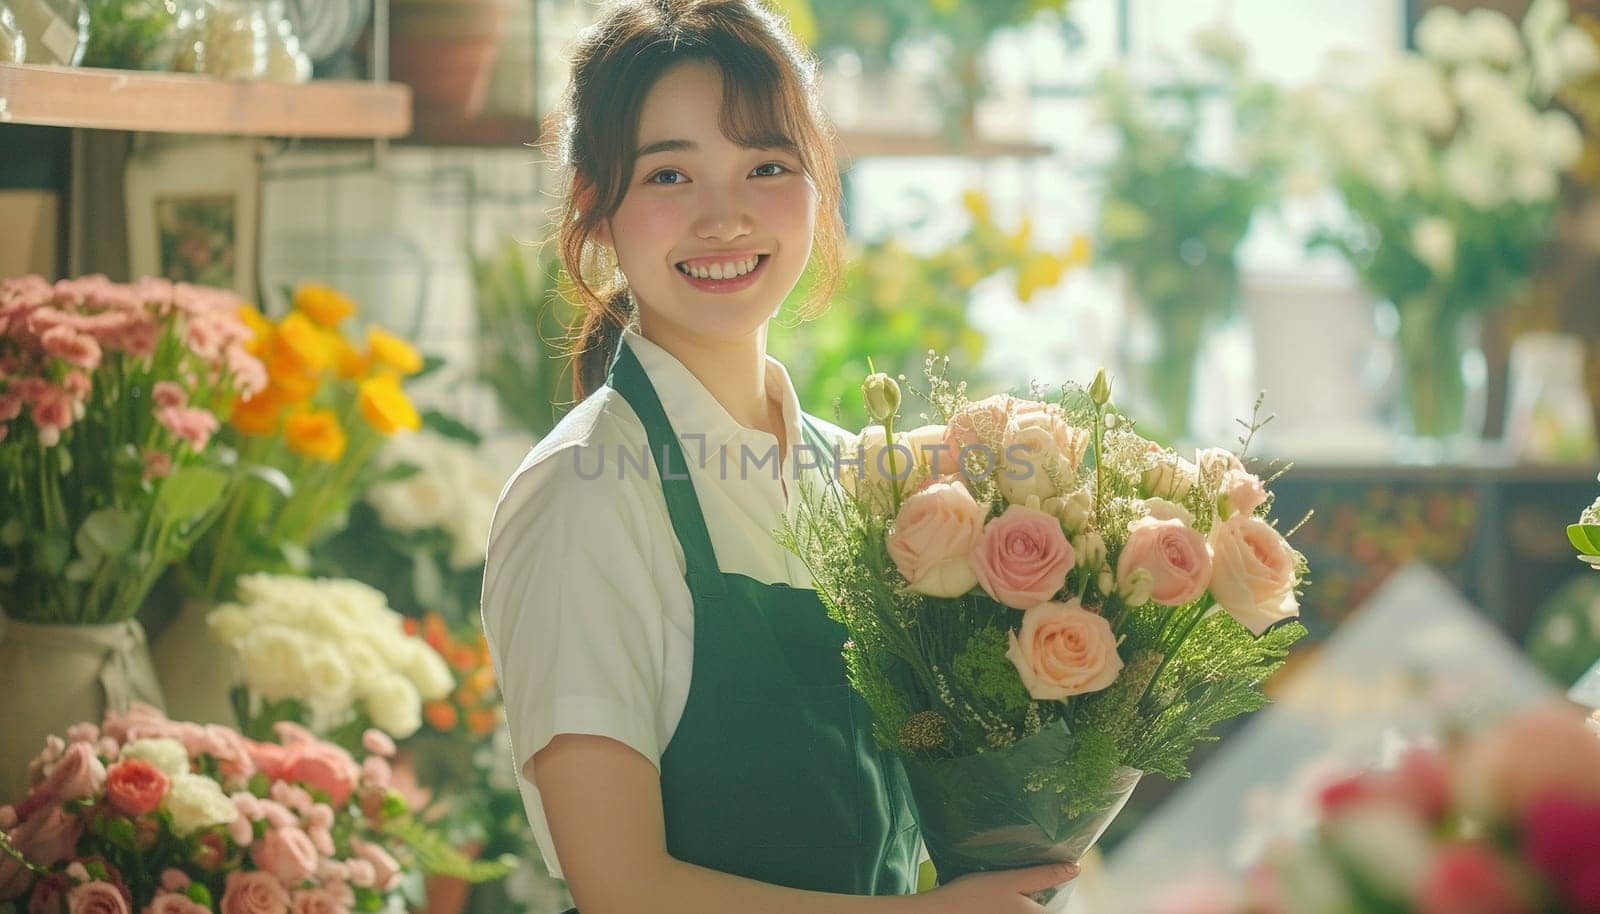 A florist girl holds a bouquet of flowers by NeuroSky